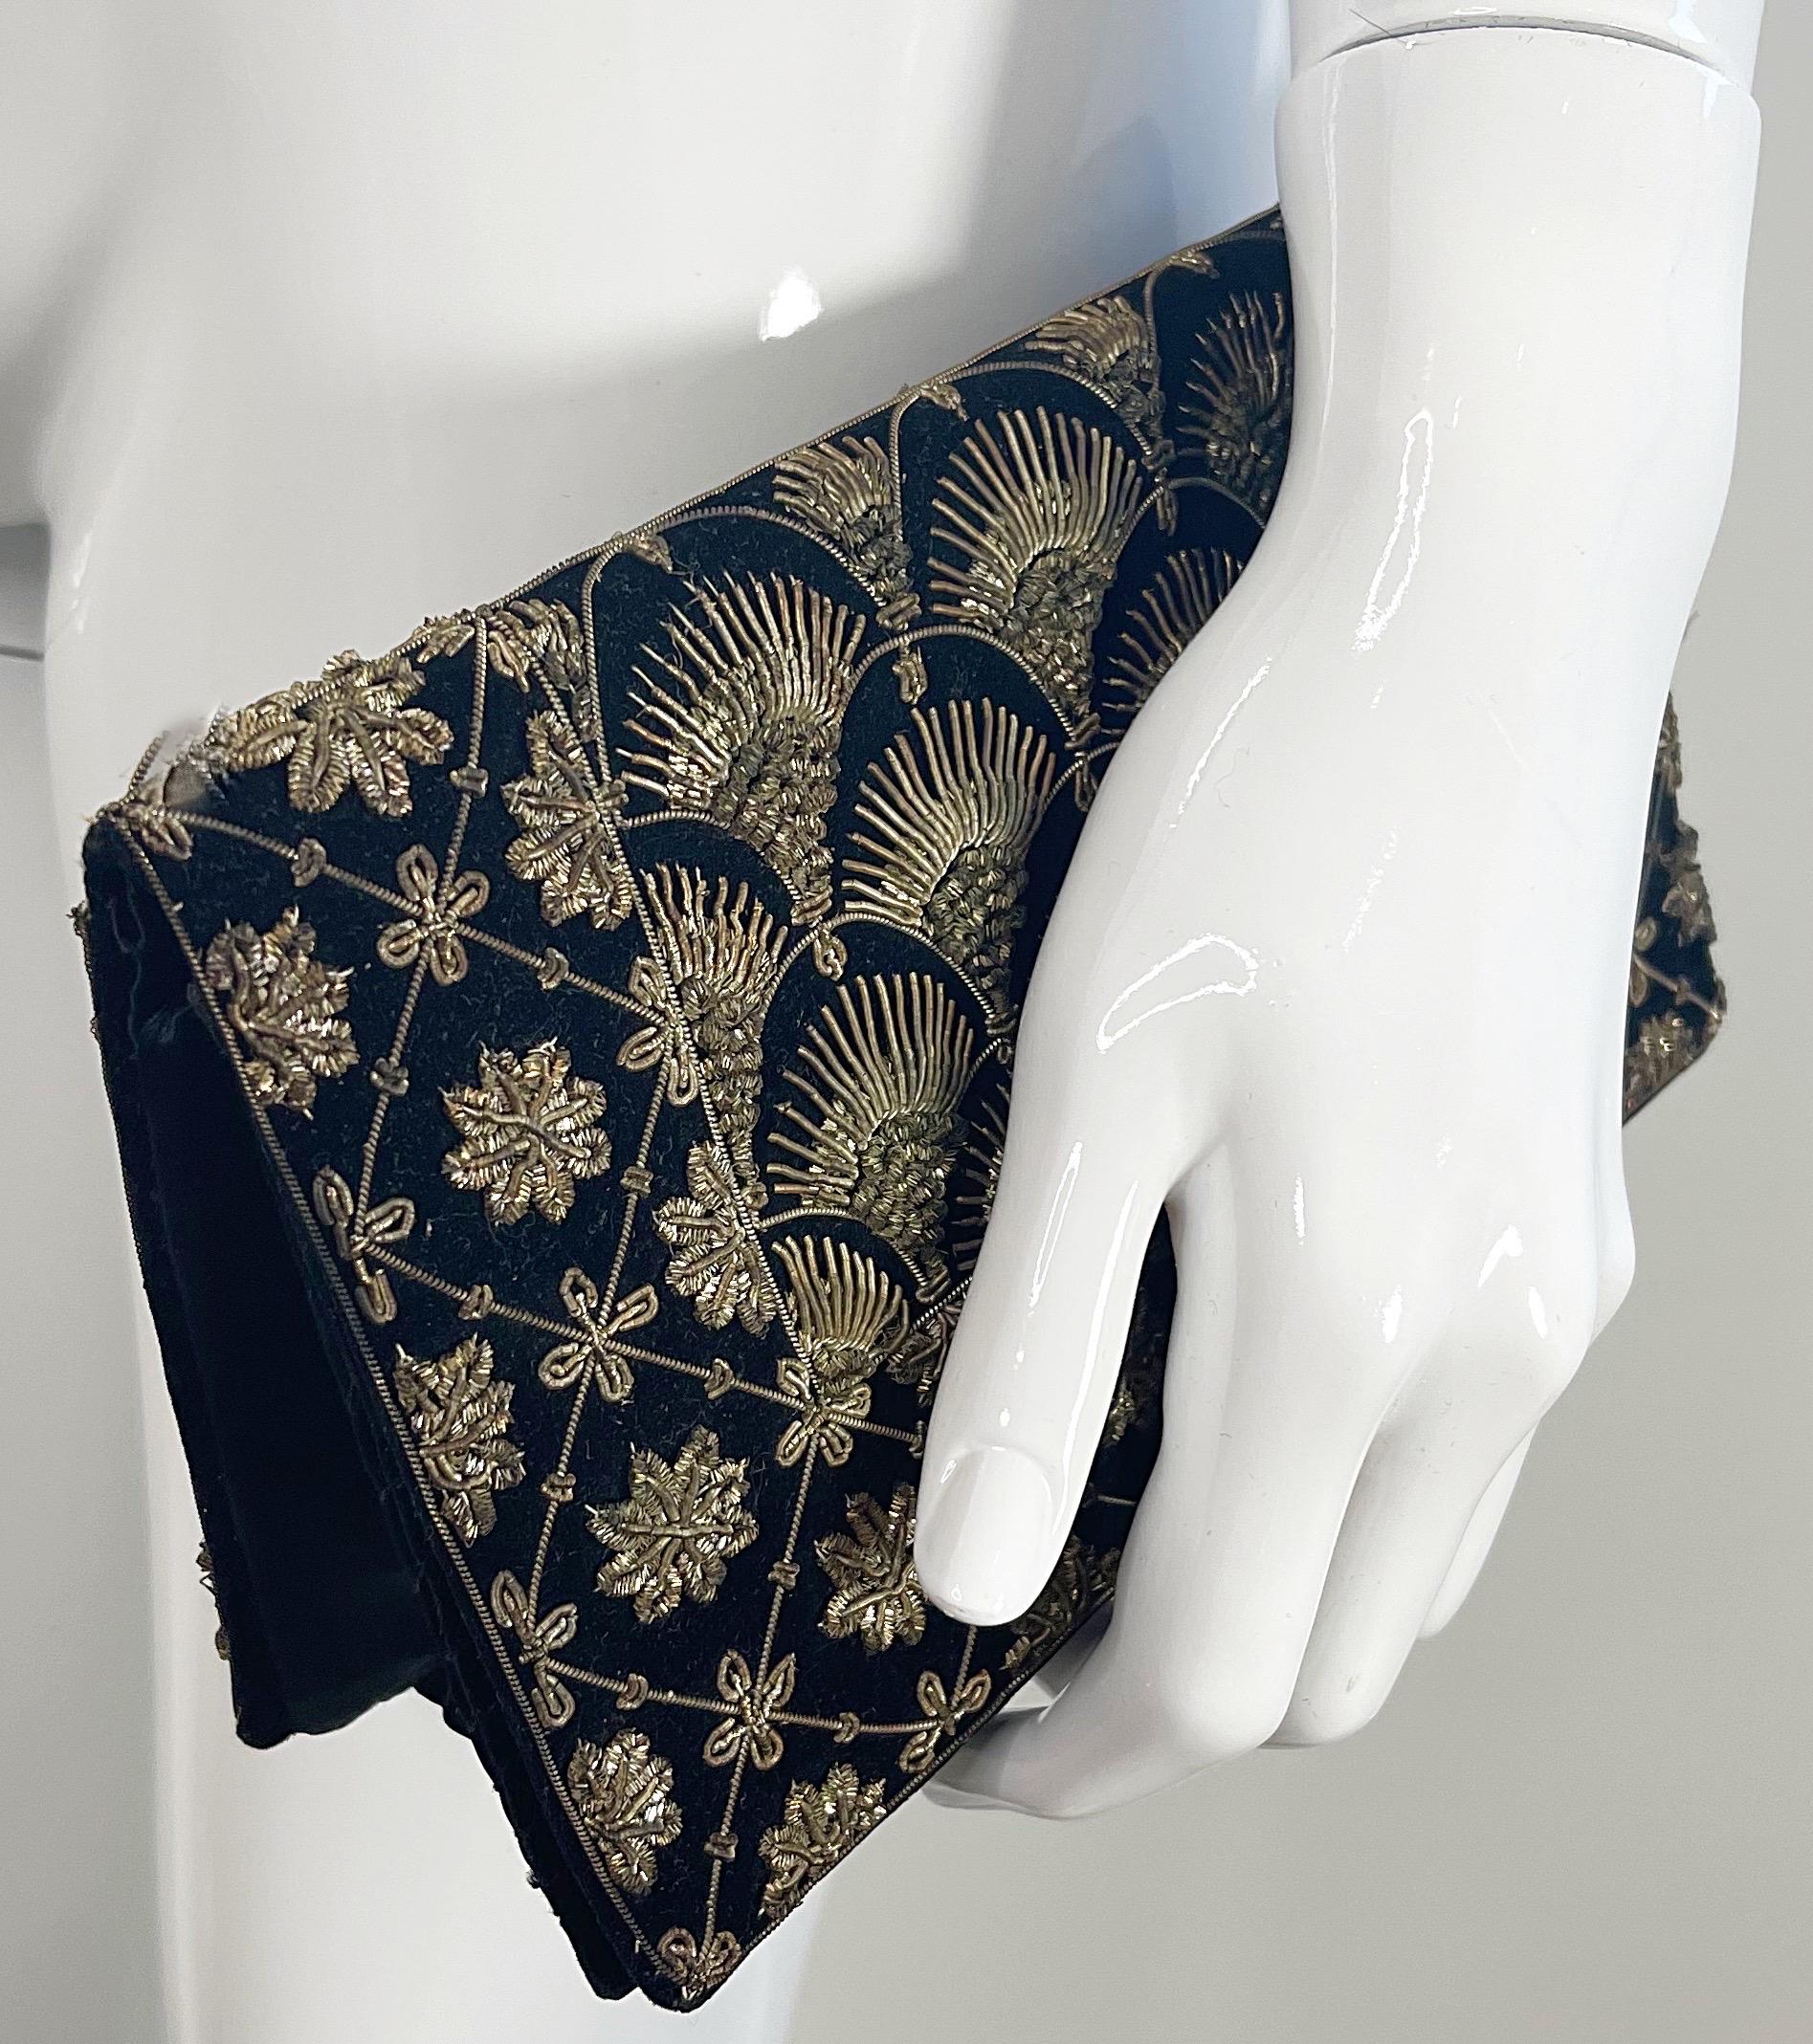 Beautiful 1950s black silk velvet Zardozi Zari gold embroidered clutch. Intricately embroidery throughout the front AND back of this beauty. The perfect size can fit a smartphone, small wallet and makeup essentials. Snaps shut. This bag can really